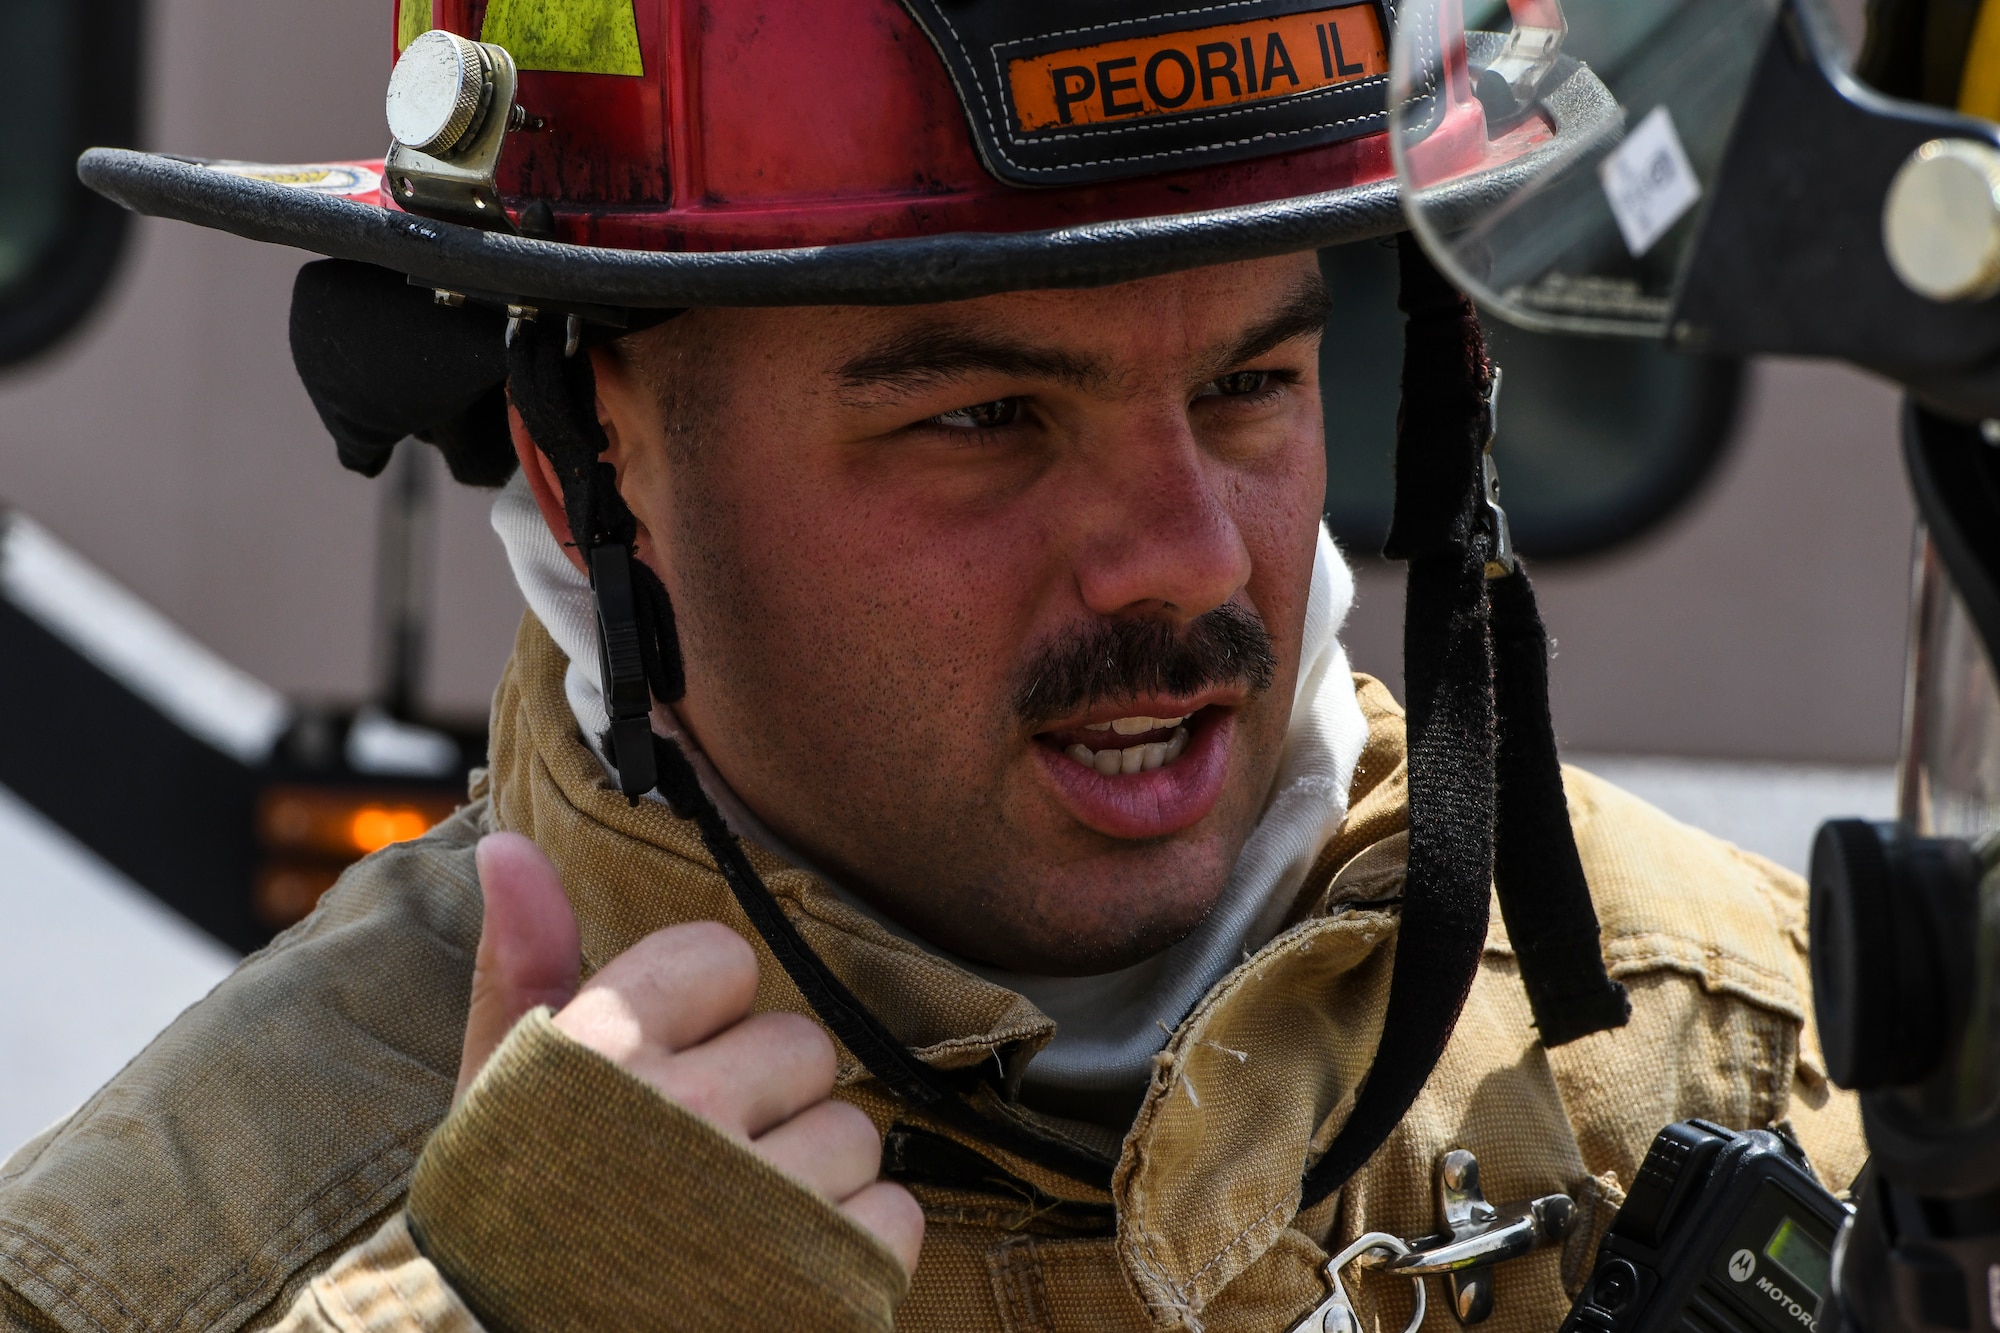 Tech. Sgt. Aaron Alcaraz, 407th Expeditionary Civil Engineer Squadron fire station captain, communicates with firefighters during an airfield exercise at Ahmed al-Jaber Air Base, Kuwait, Aug. 16, 2019. Several emergency service vehicles arrived on-scene and simulated putting out the fire in the MV-22 Osprey then providing immediate medical care to the victims. Firefighters and medical personnel included Airmen, Marines and Sailors. (U.S. Air Force photo by Senior Airman Lane T. Plummer)